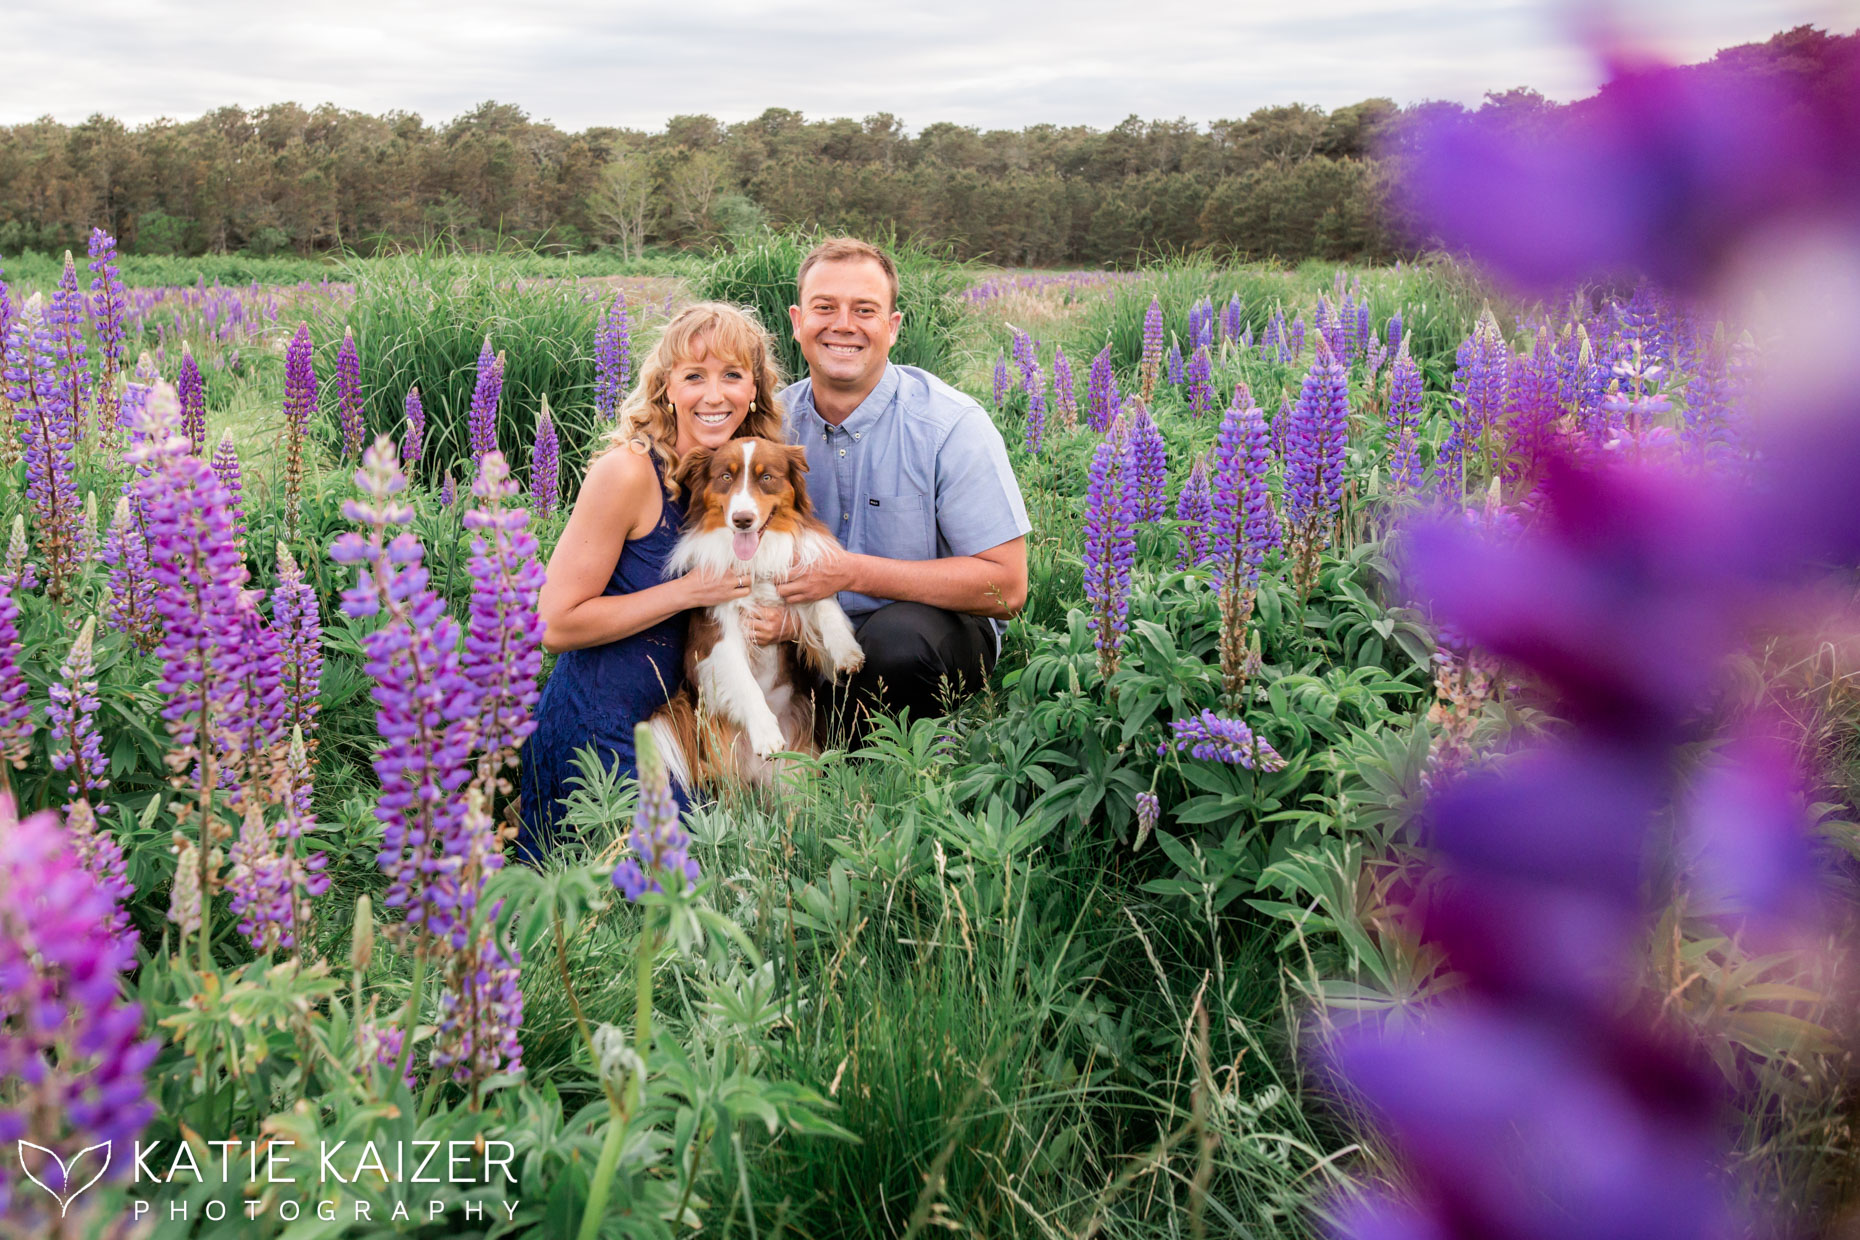 Leah and Matts Engagement Session with their dog Reef - Katie Kaizer Photography